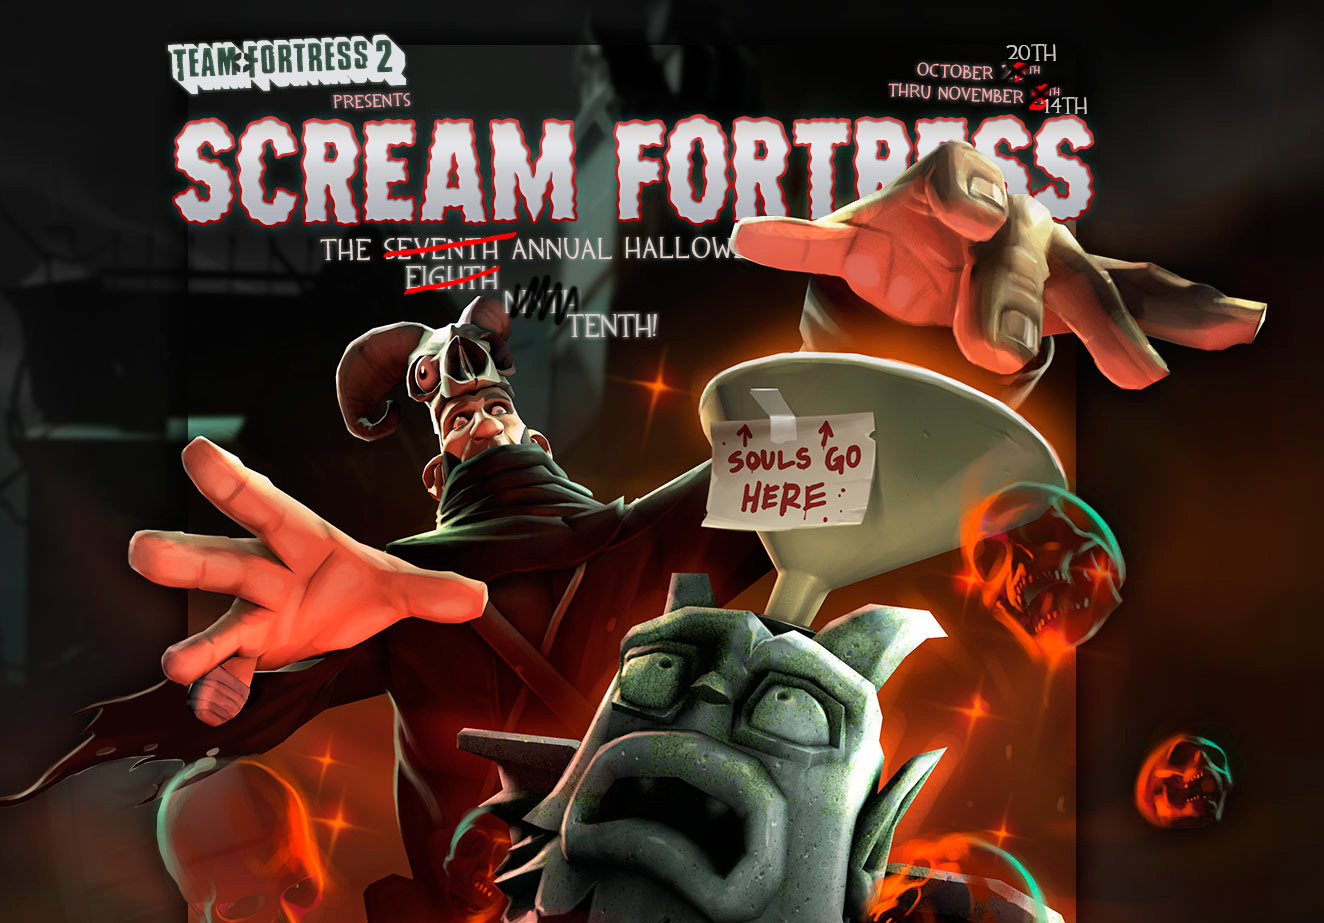 “Scream Fortress” llega a Team Fortress 2 Power Gaming Network